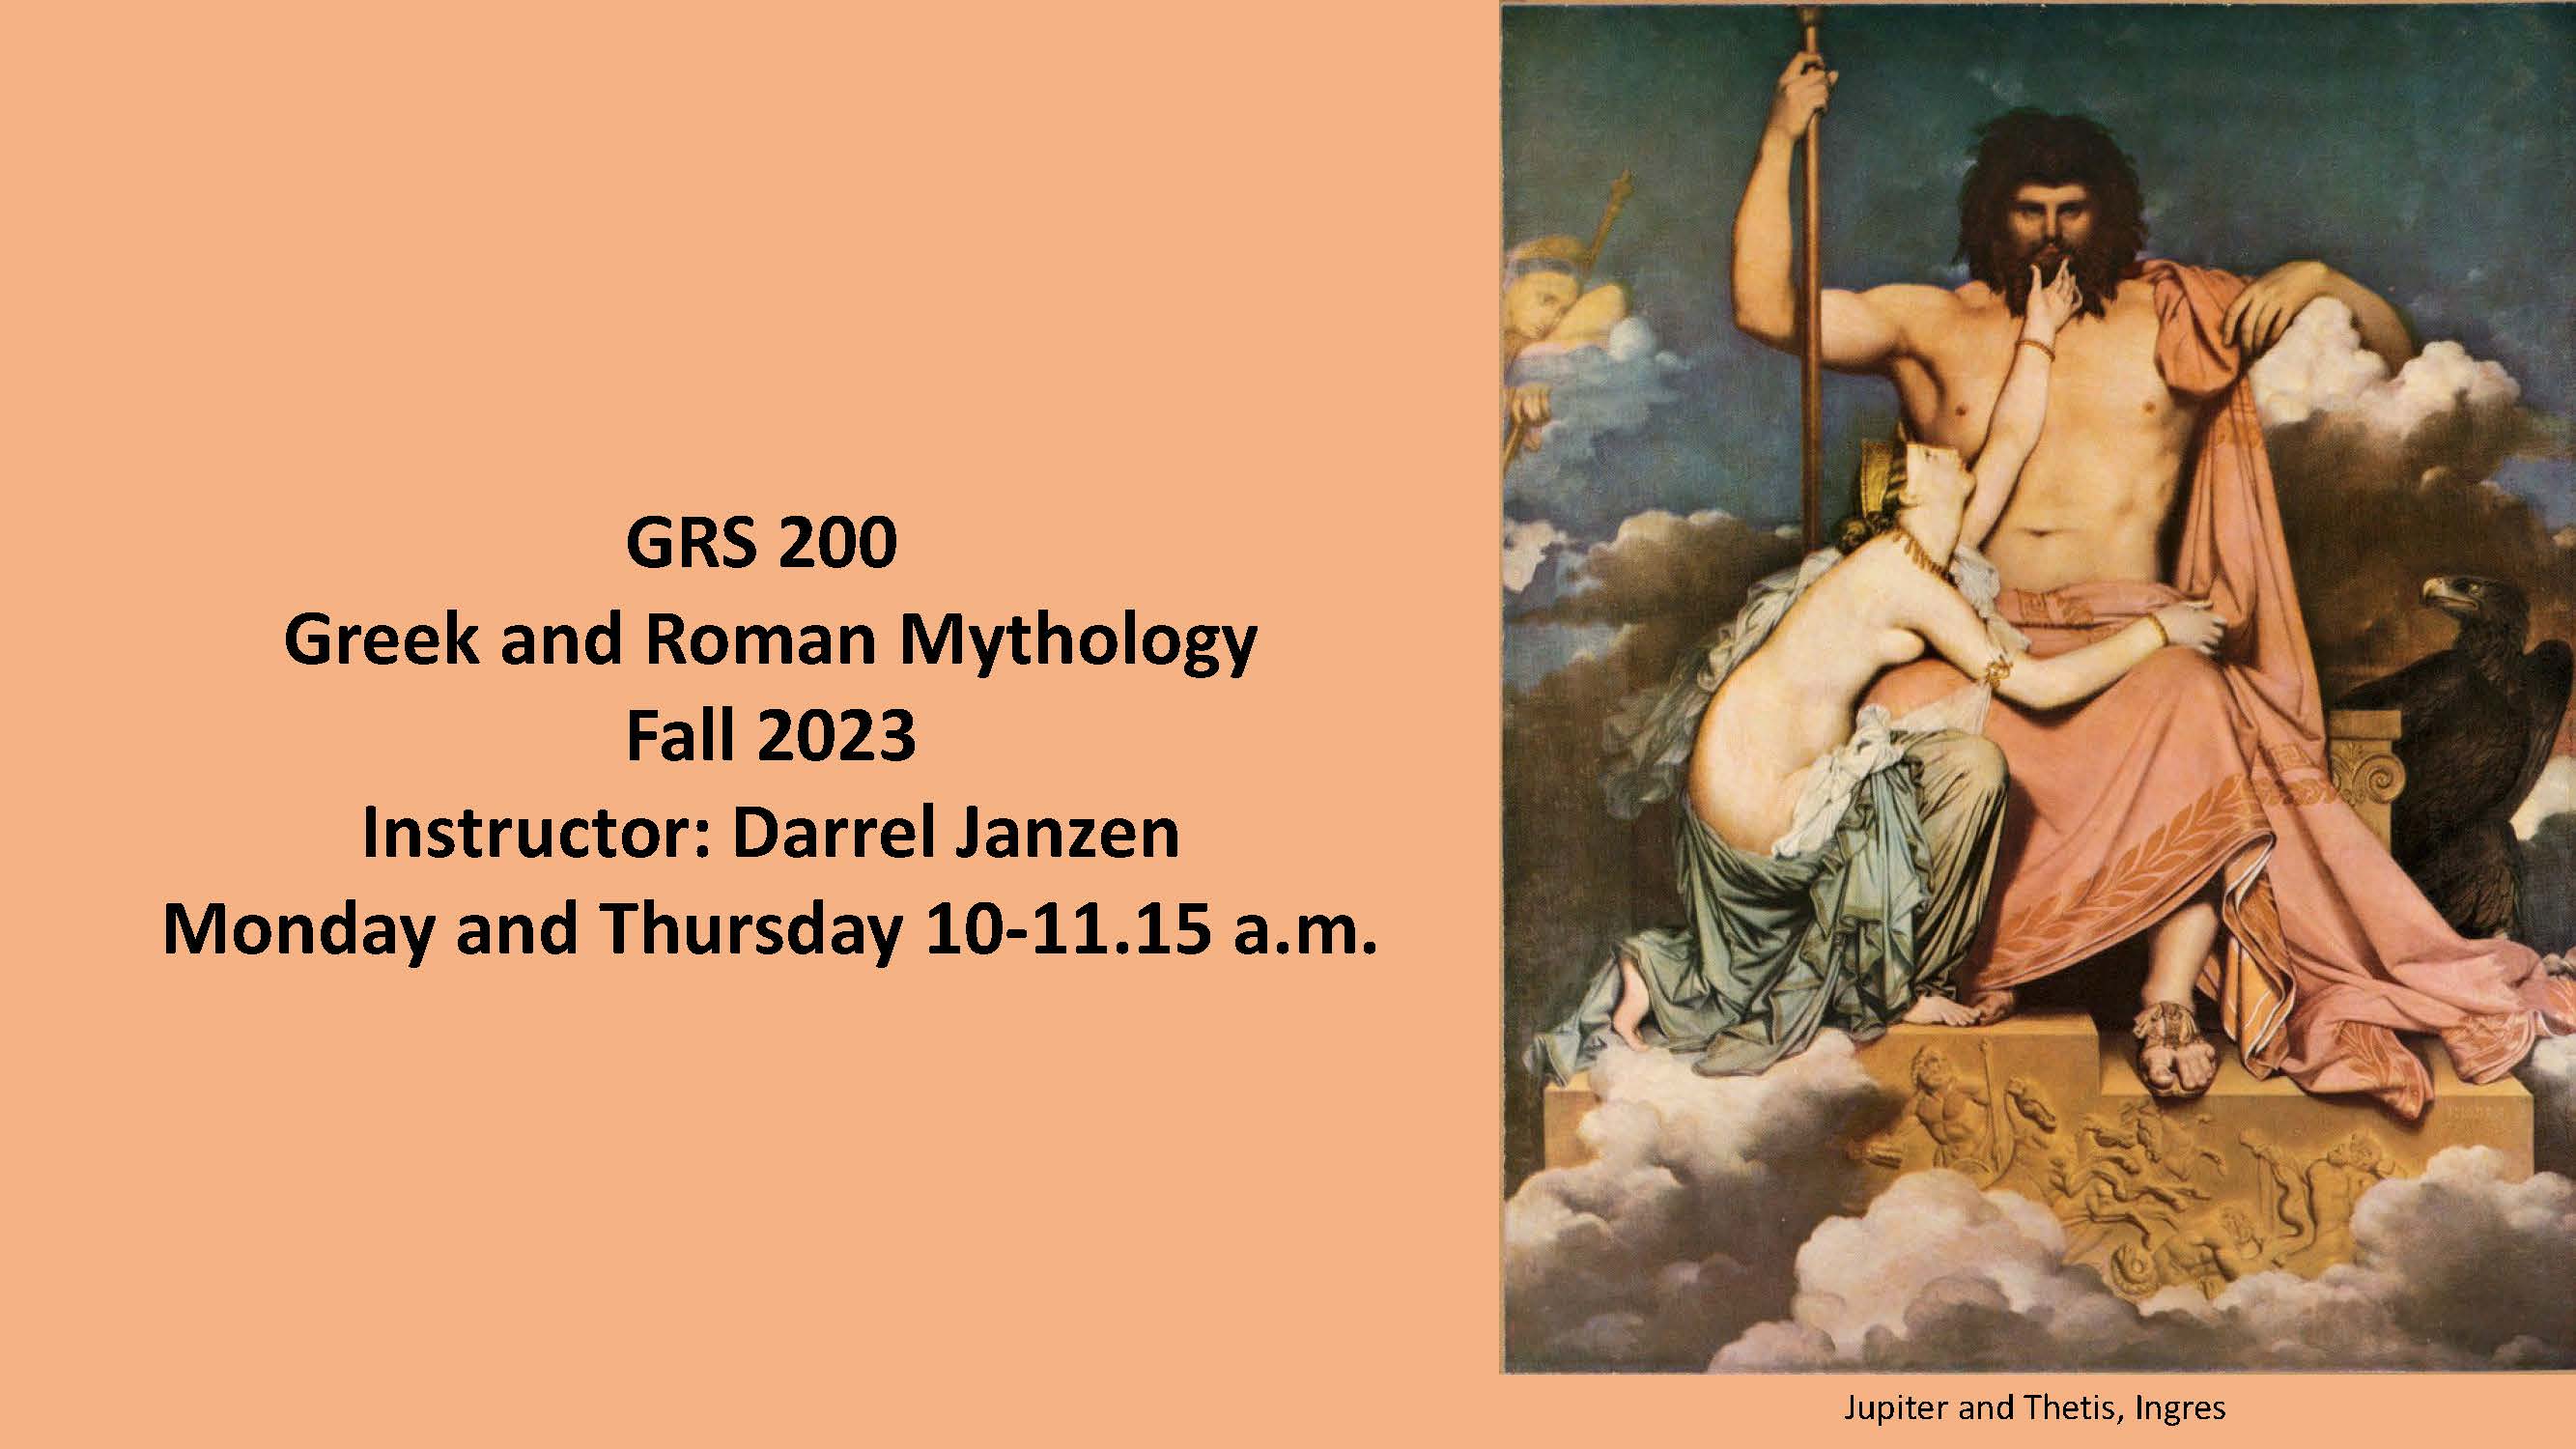 IDENTIFY, DESCRIBE, and ANALYZE Greek and Roman myth and mythical figures